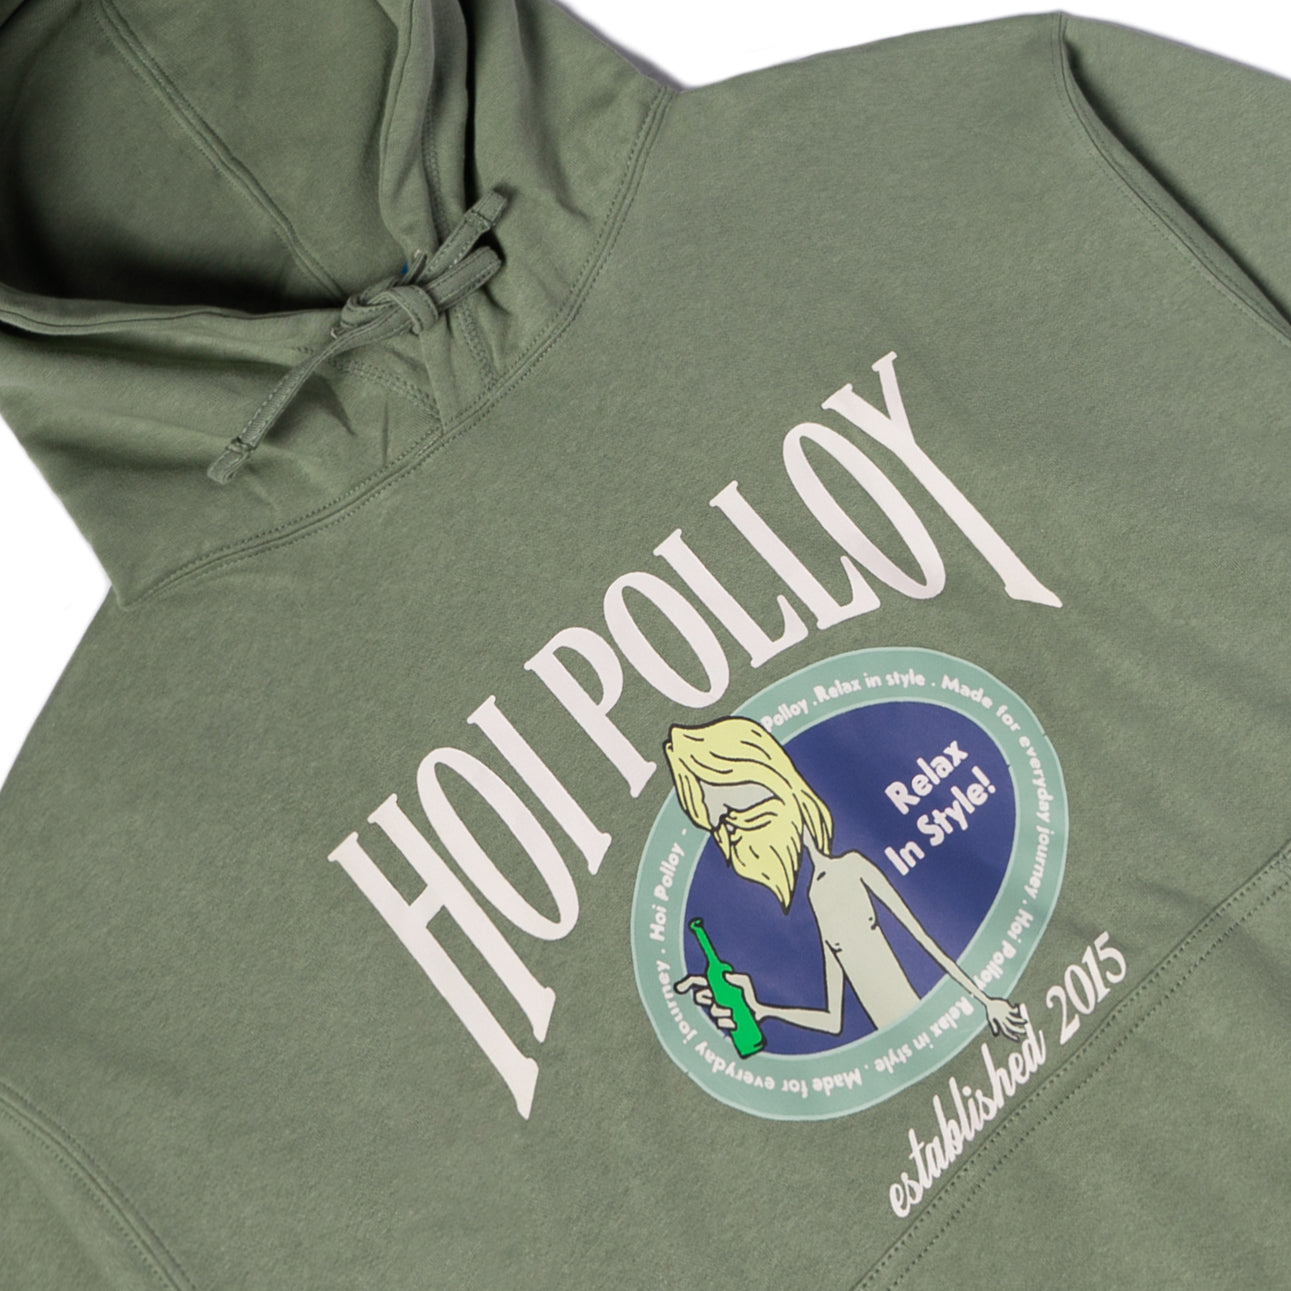 Relax In Style Green Hoodie